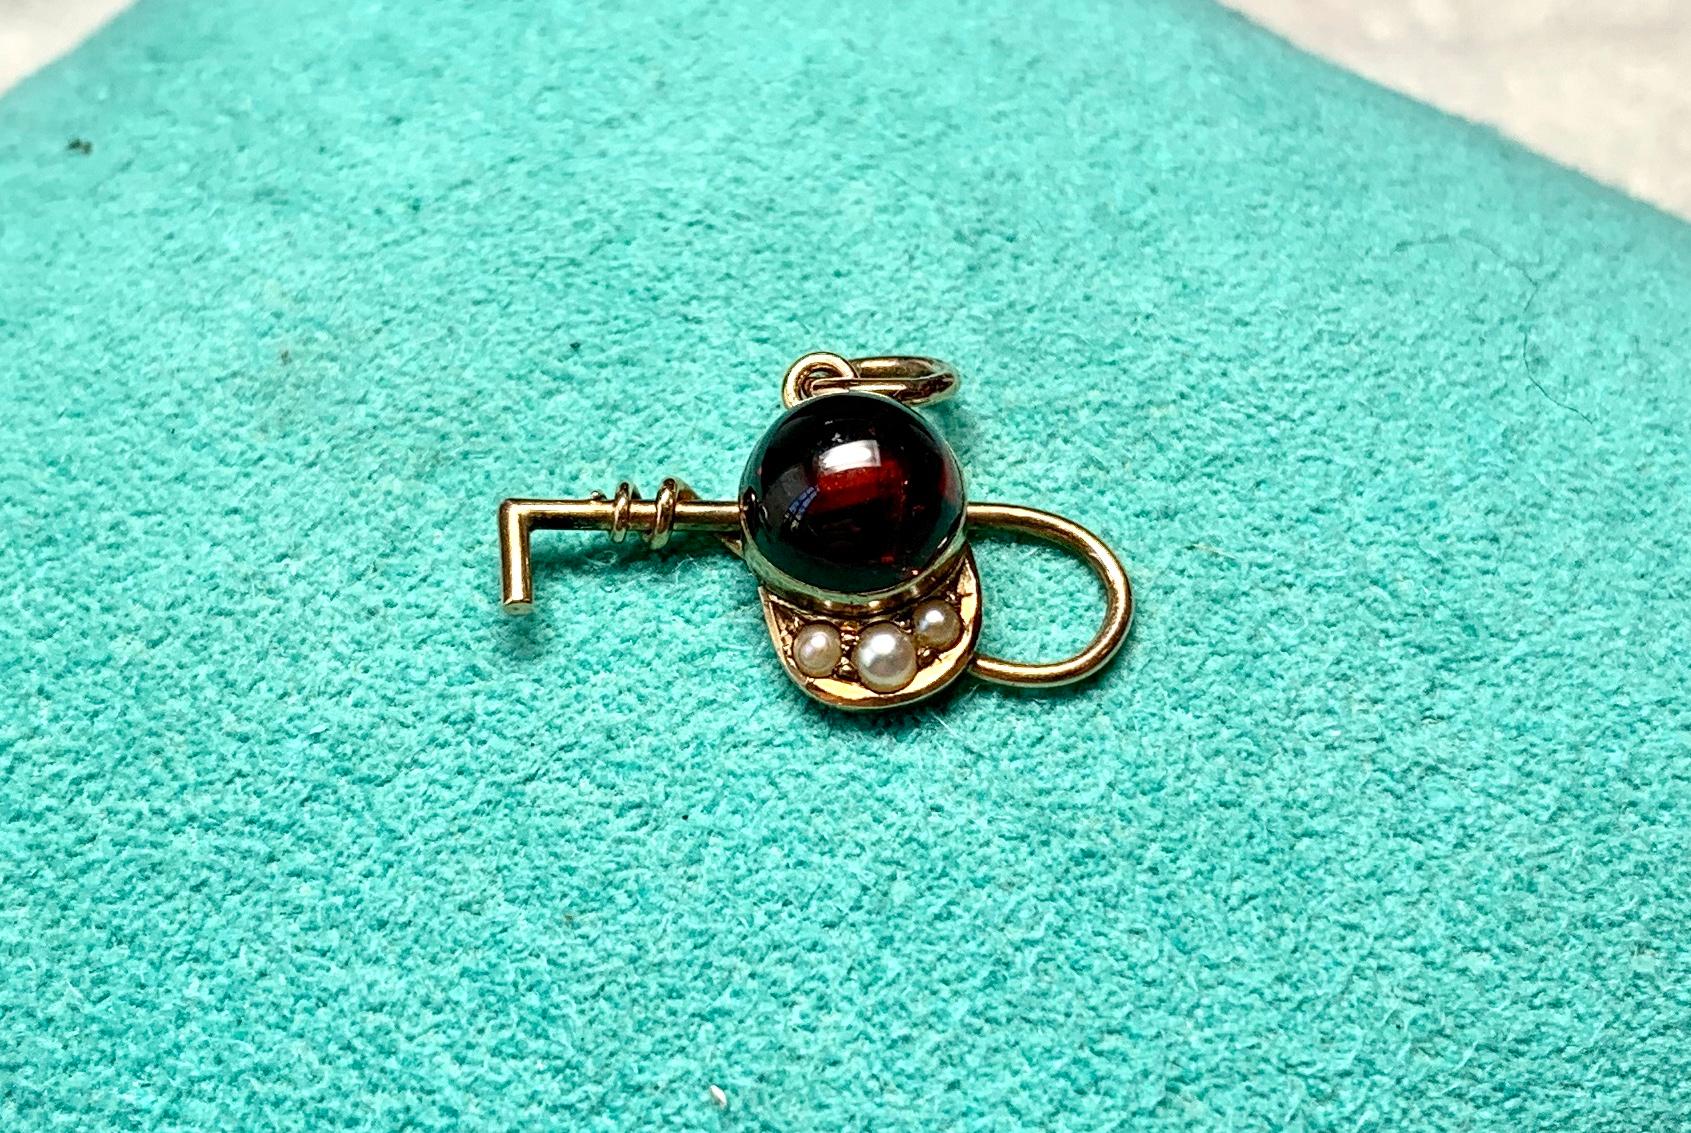 Round Cut Horse Equestrian Hat Crop Garnet 14K Pearl Charm Pendant Necklace Hunting Riding For Sale